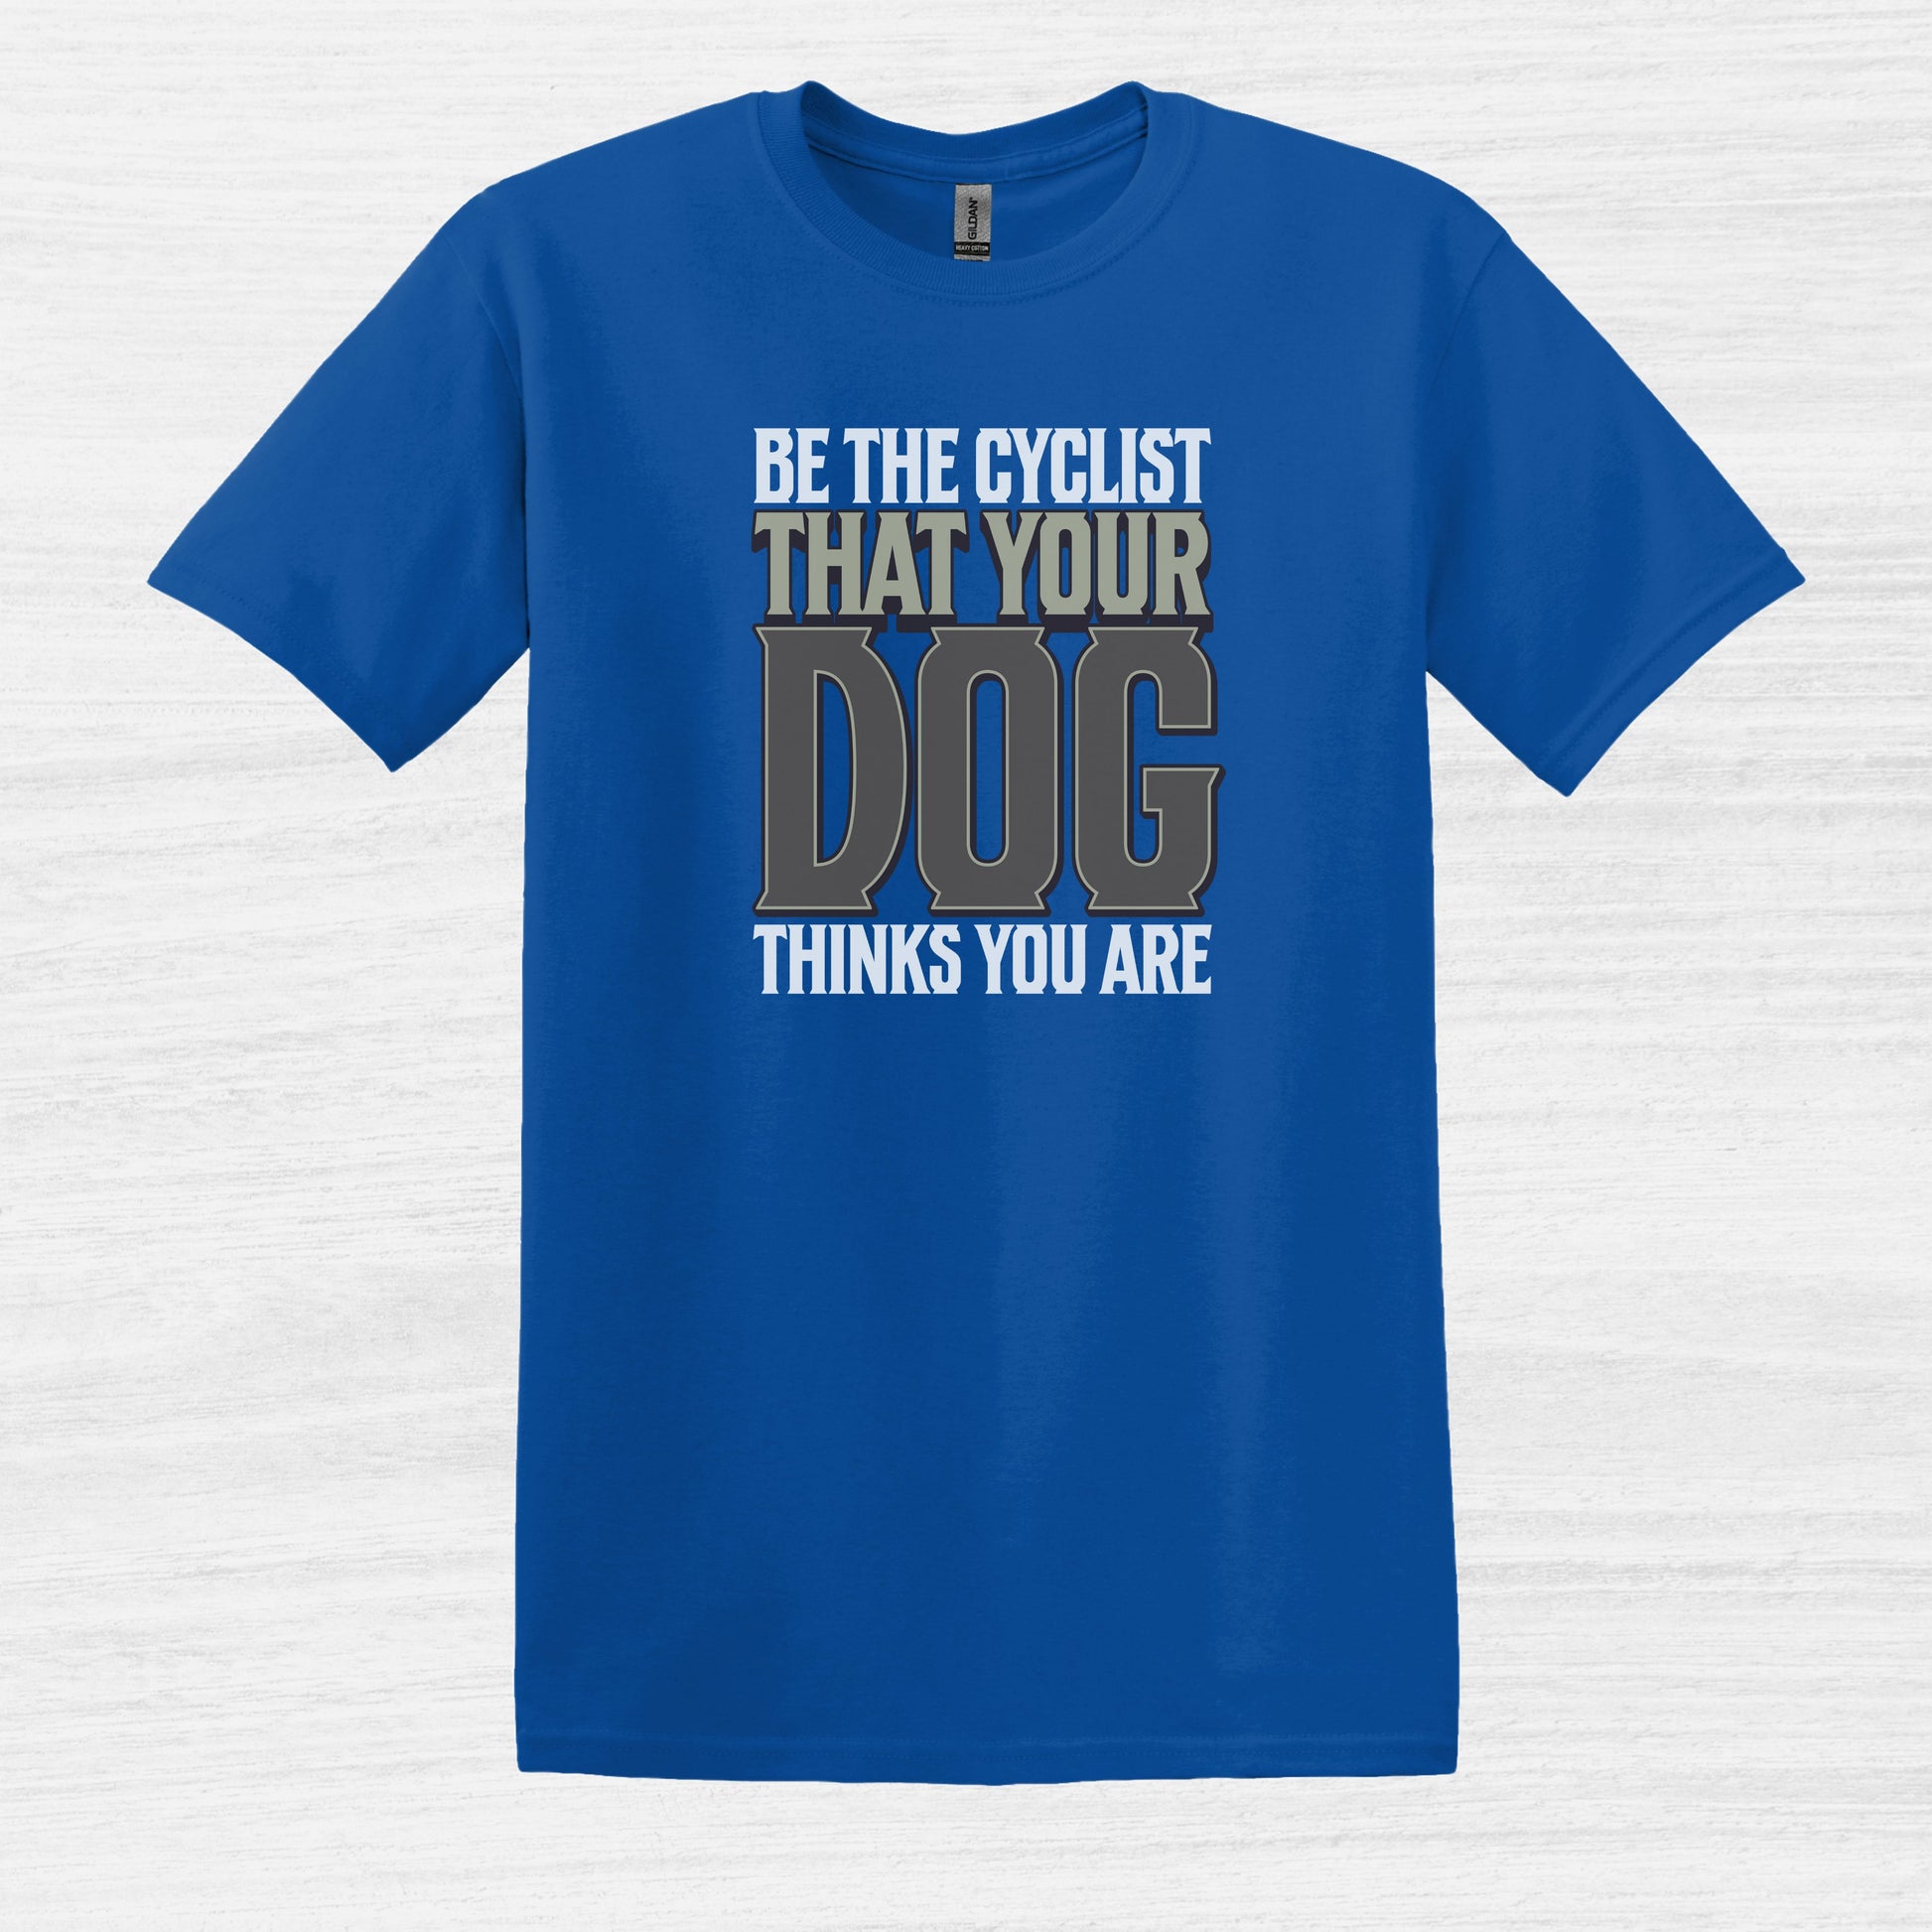 Bike Bliss Be the cyclist that your dog thinks you are T-Shirt for Men Size Royal Blue 2